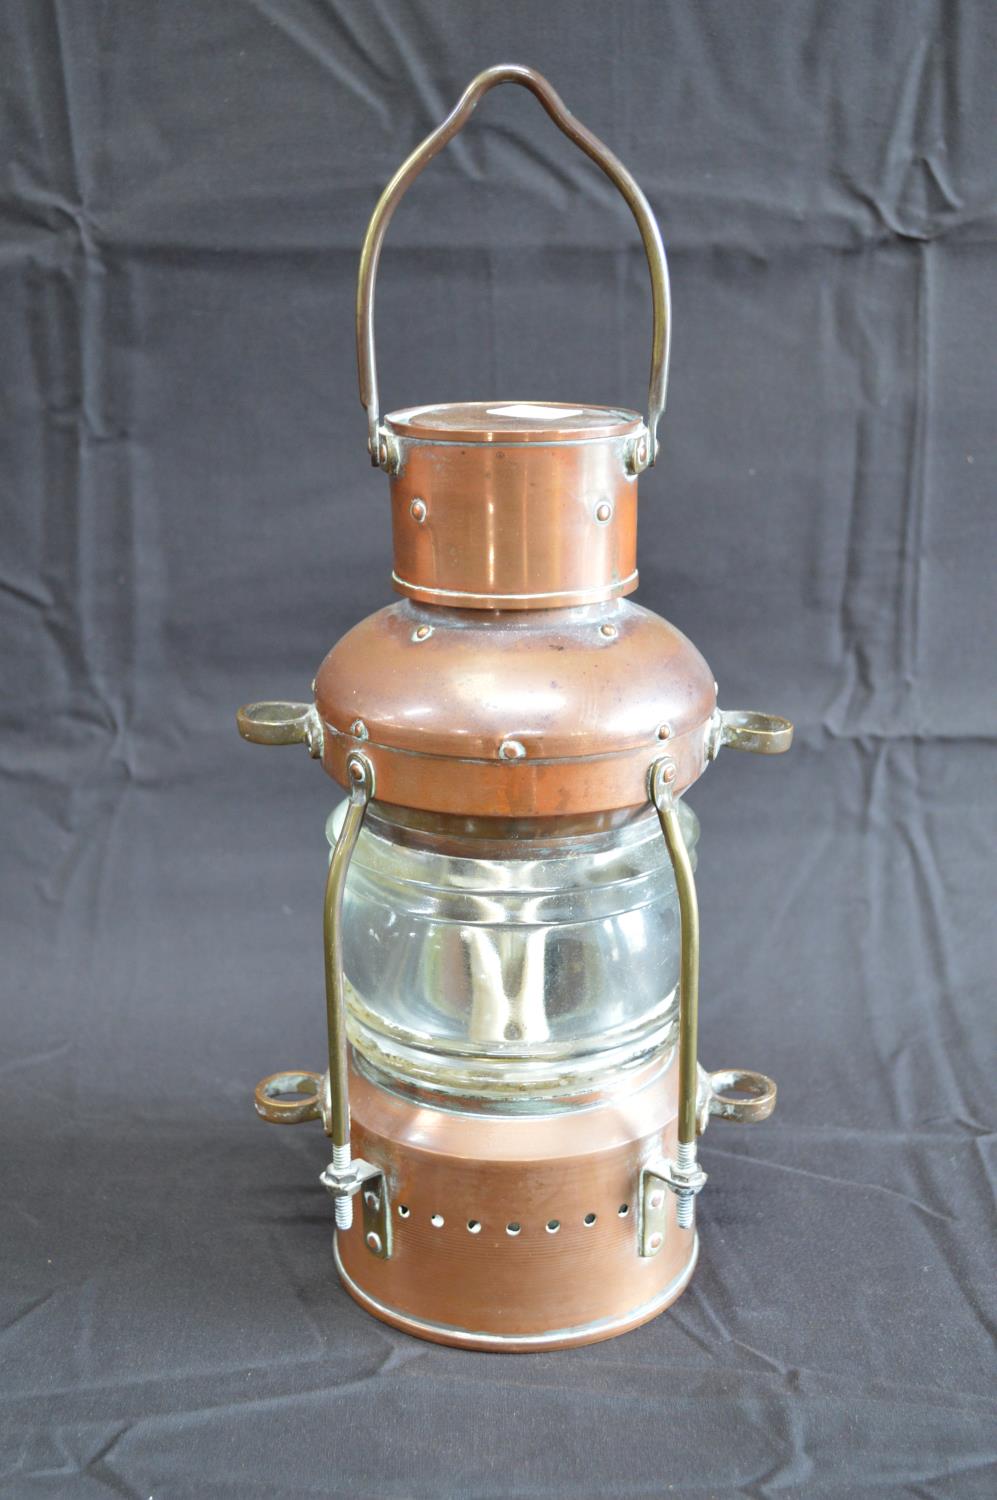 Un-named copper 360 degree anchor lantern with brass mounts - 33cm tall Please note descriptions are